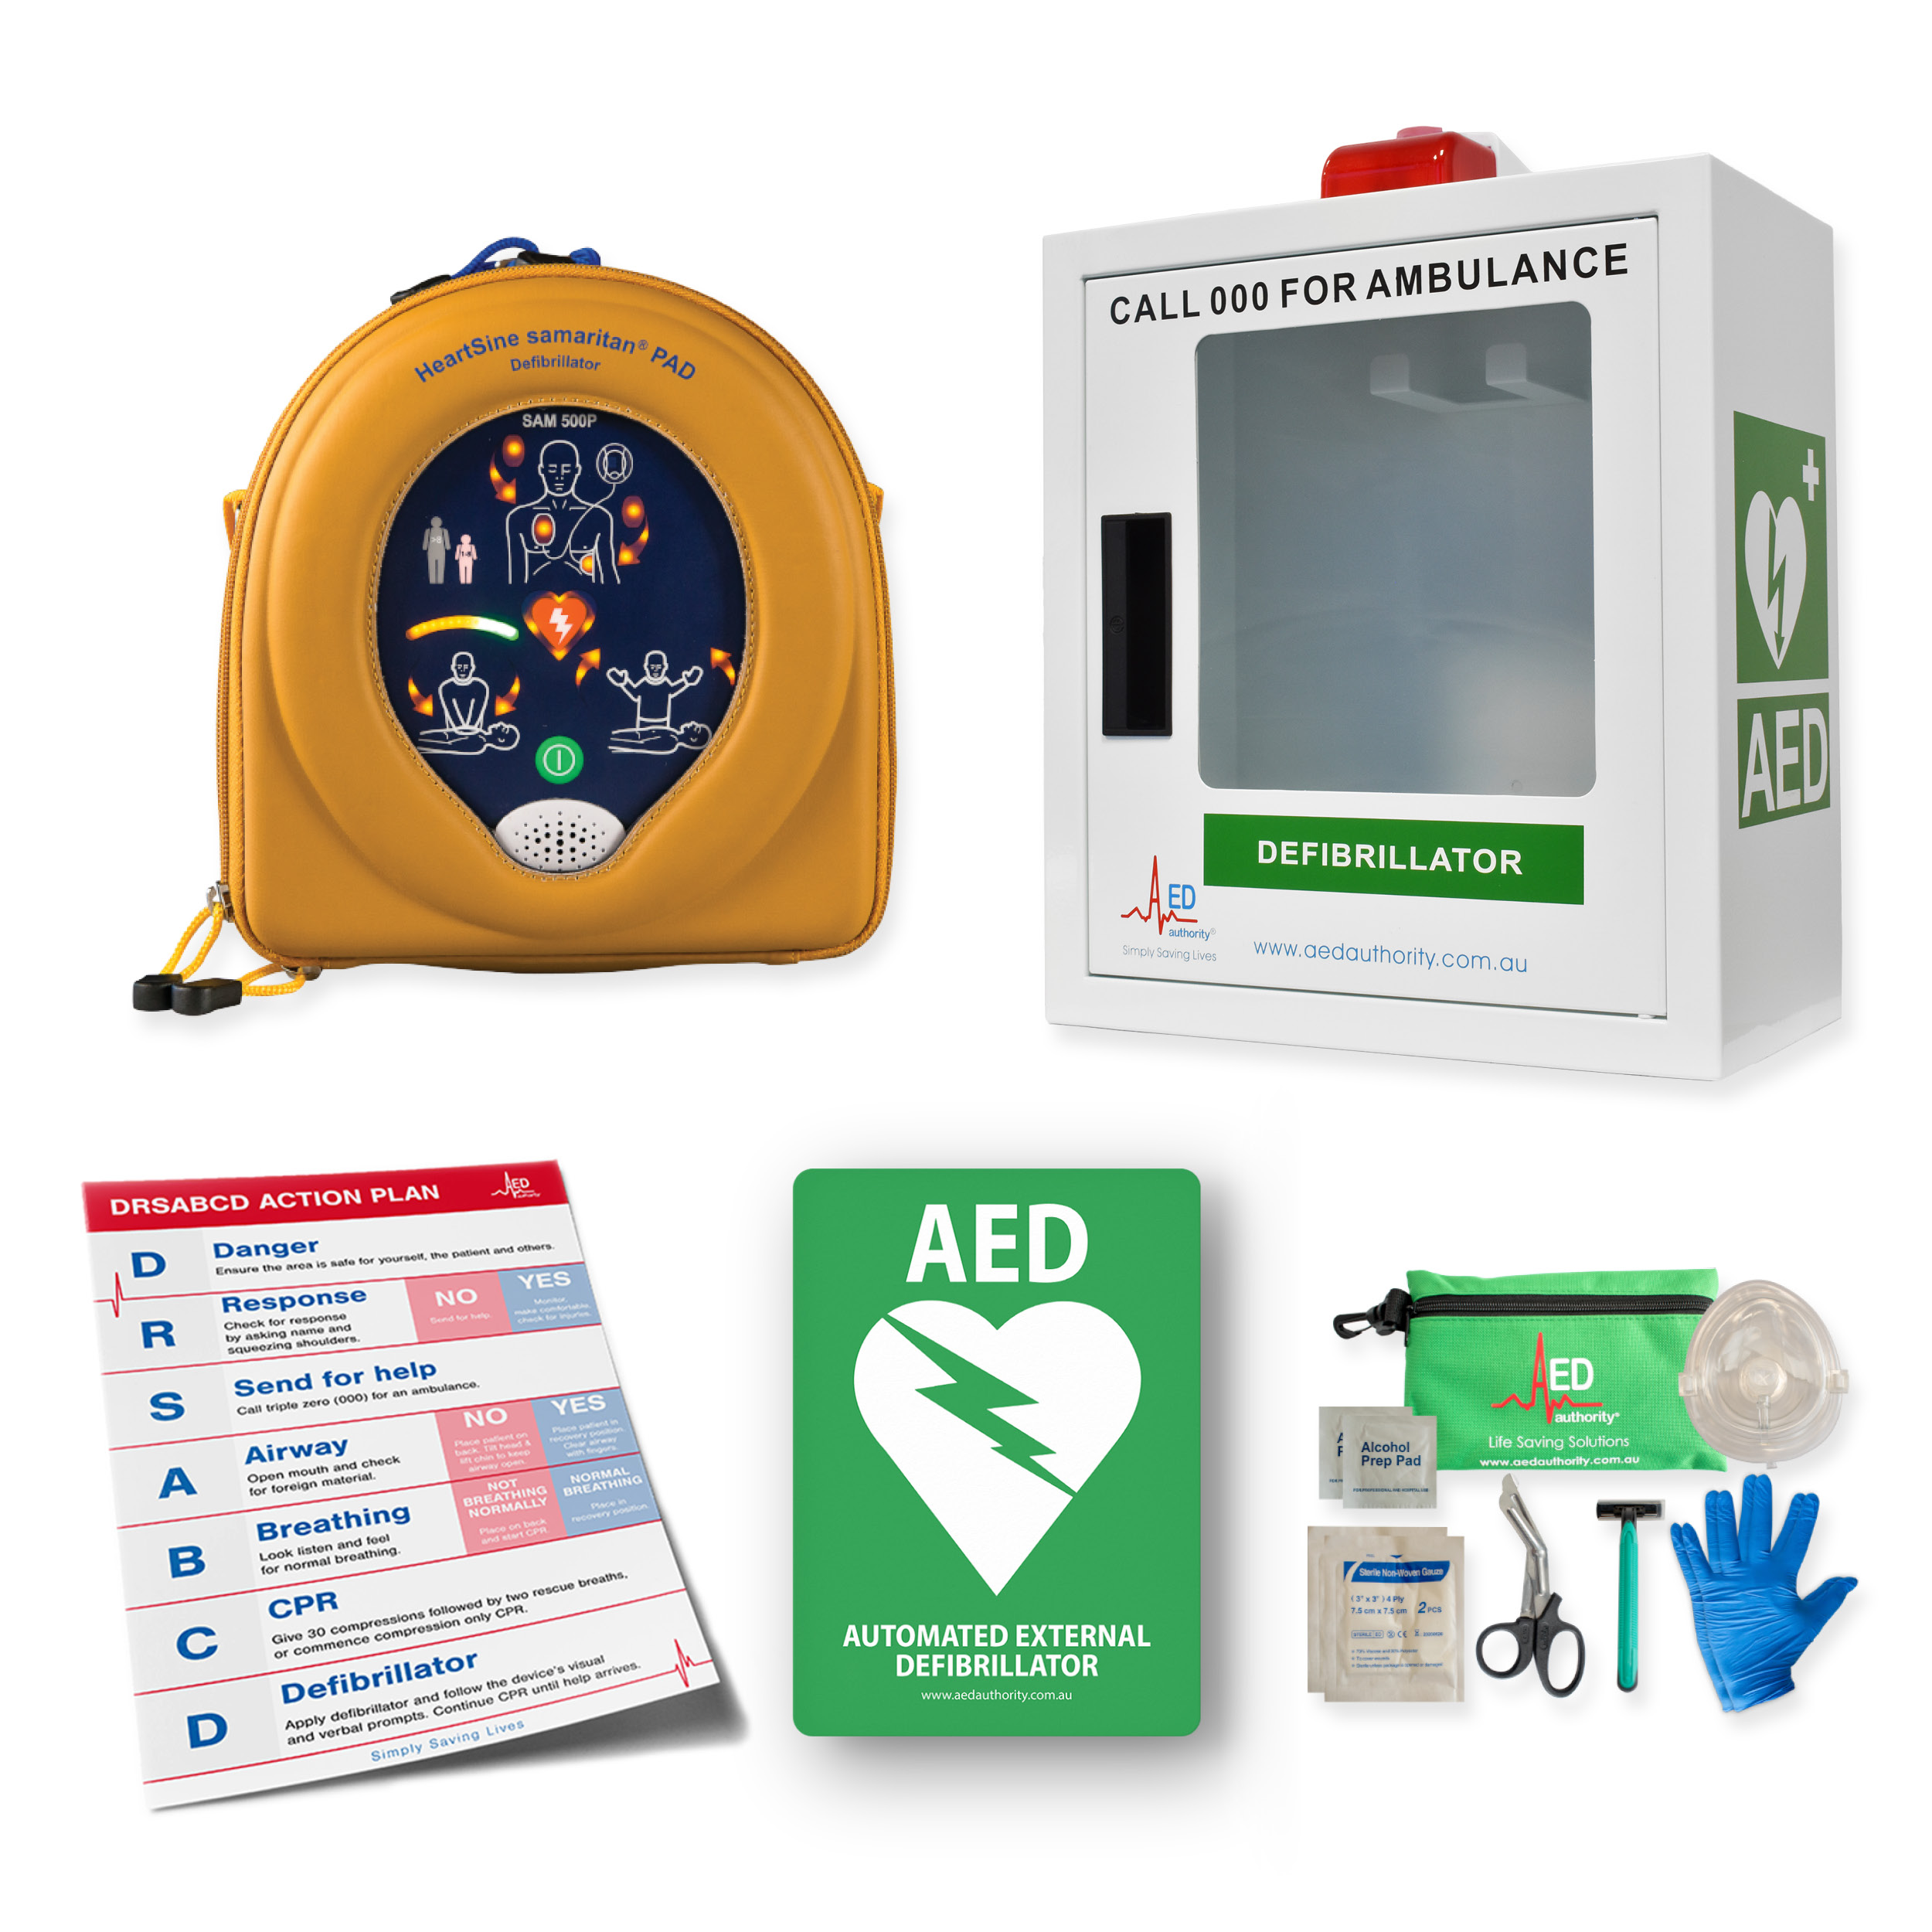 Picture of a HeartSine 500P AED with Cabinet and accessories